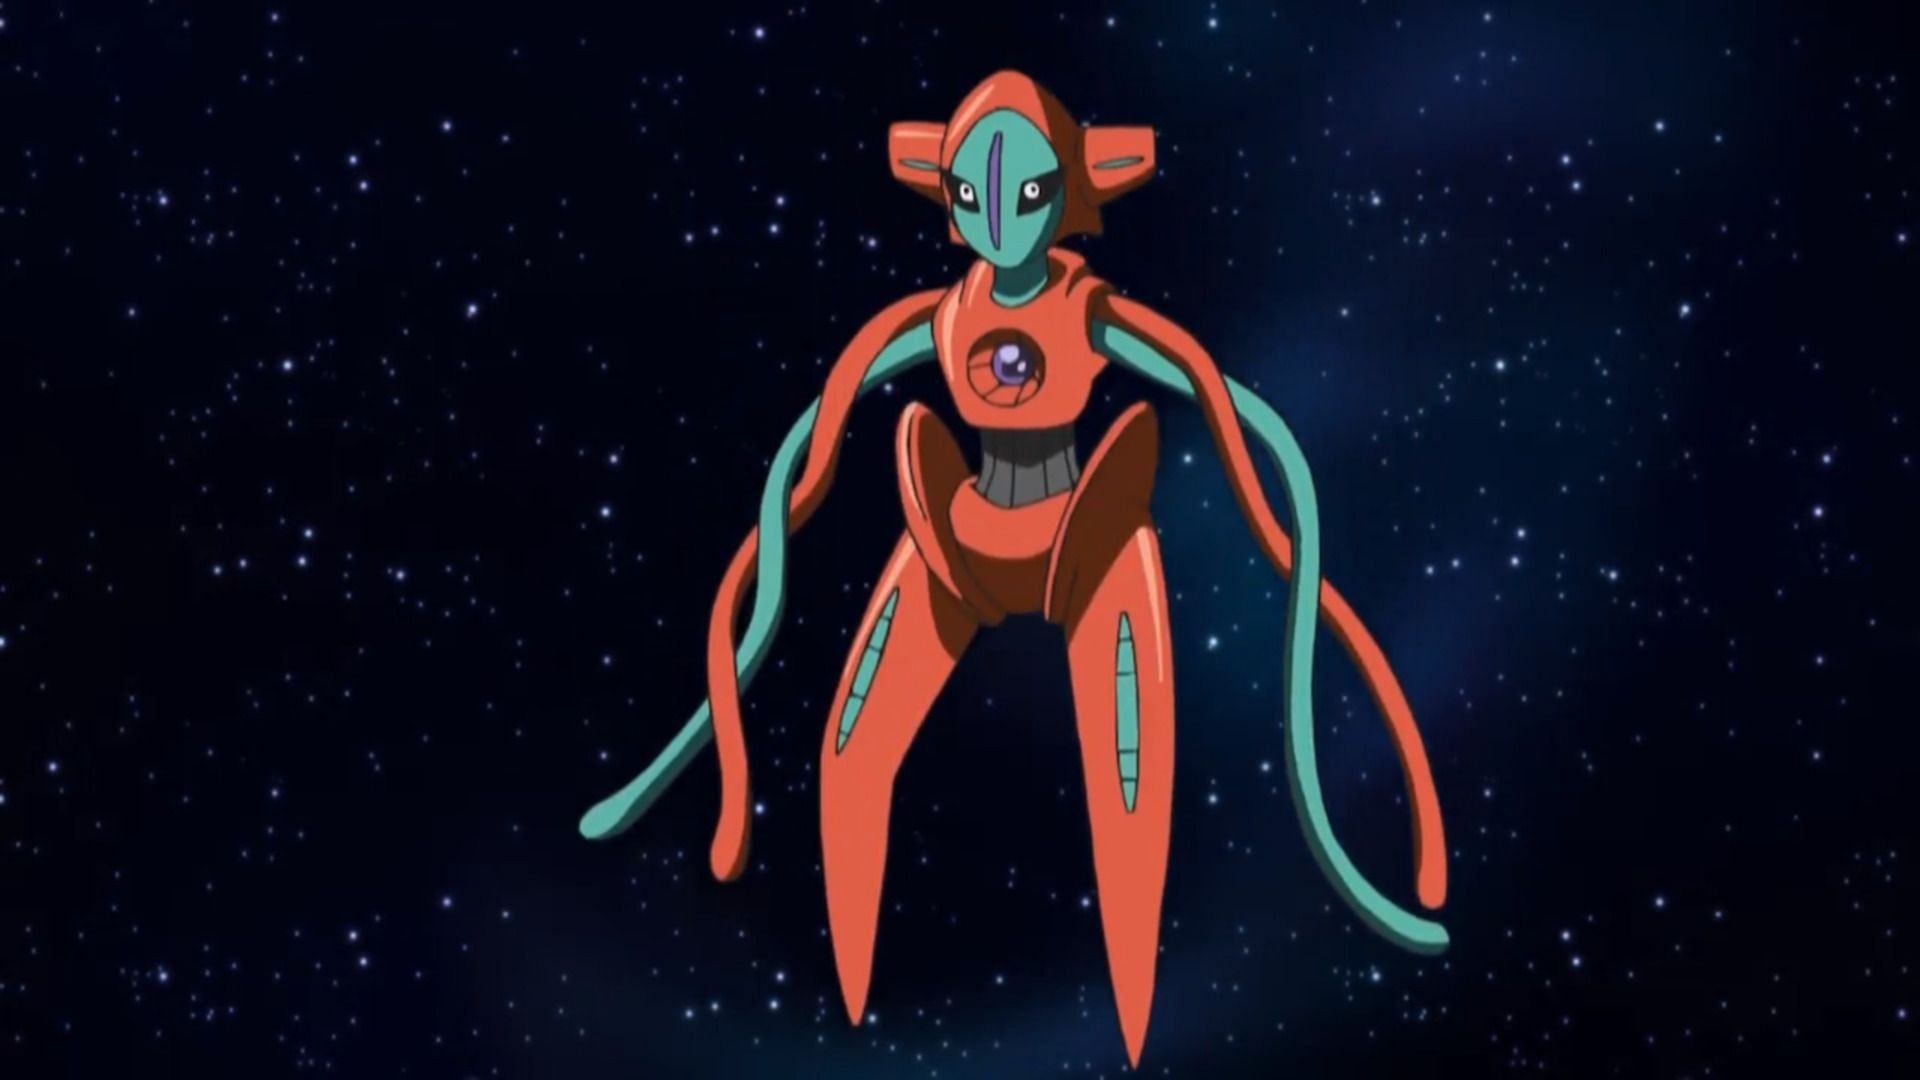 Pokemon Go Deoxys forms: Counters, weaknesses & can they be Shiny? - Dexerto